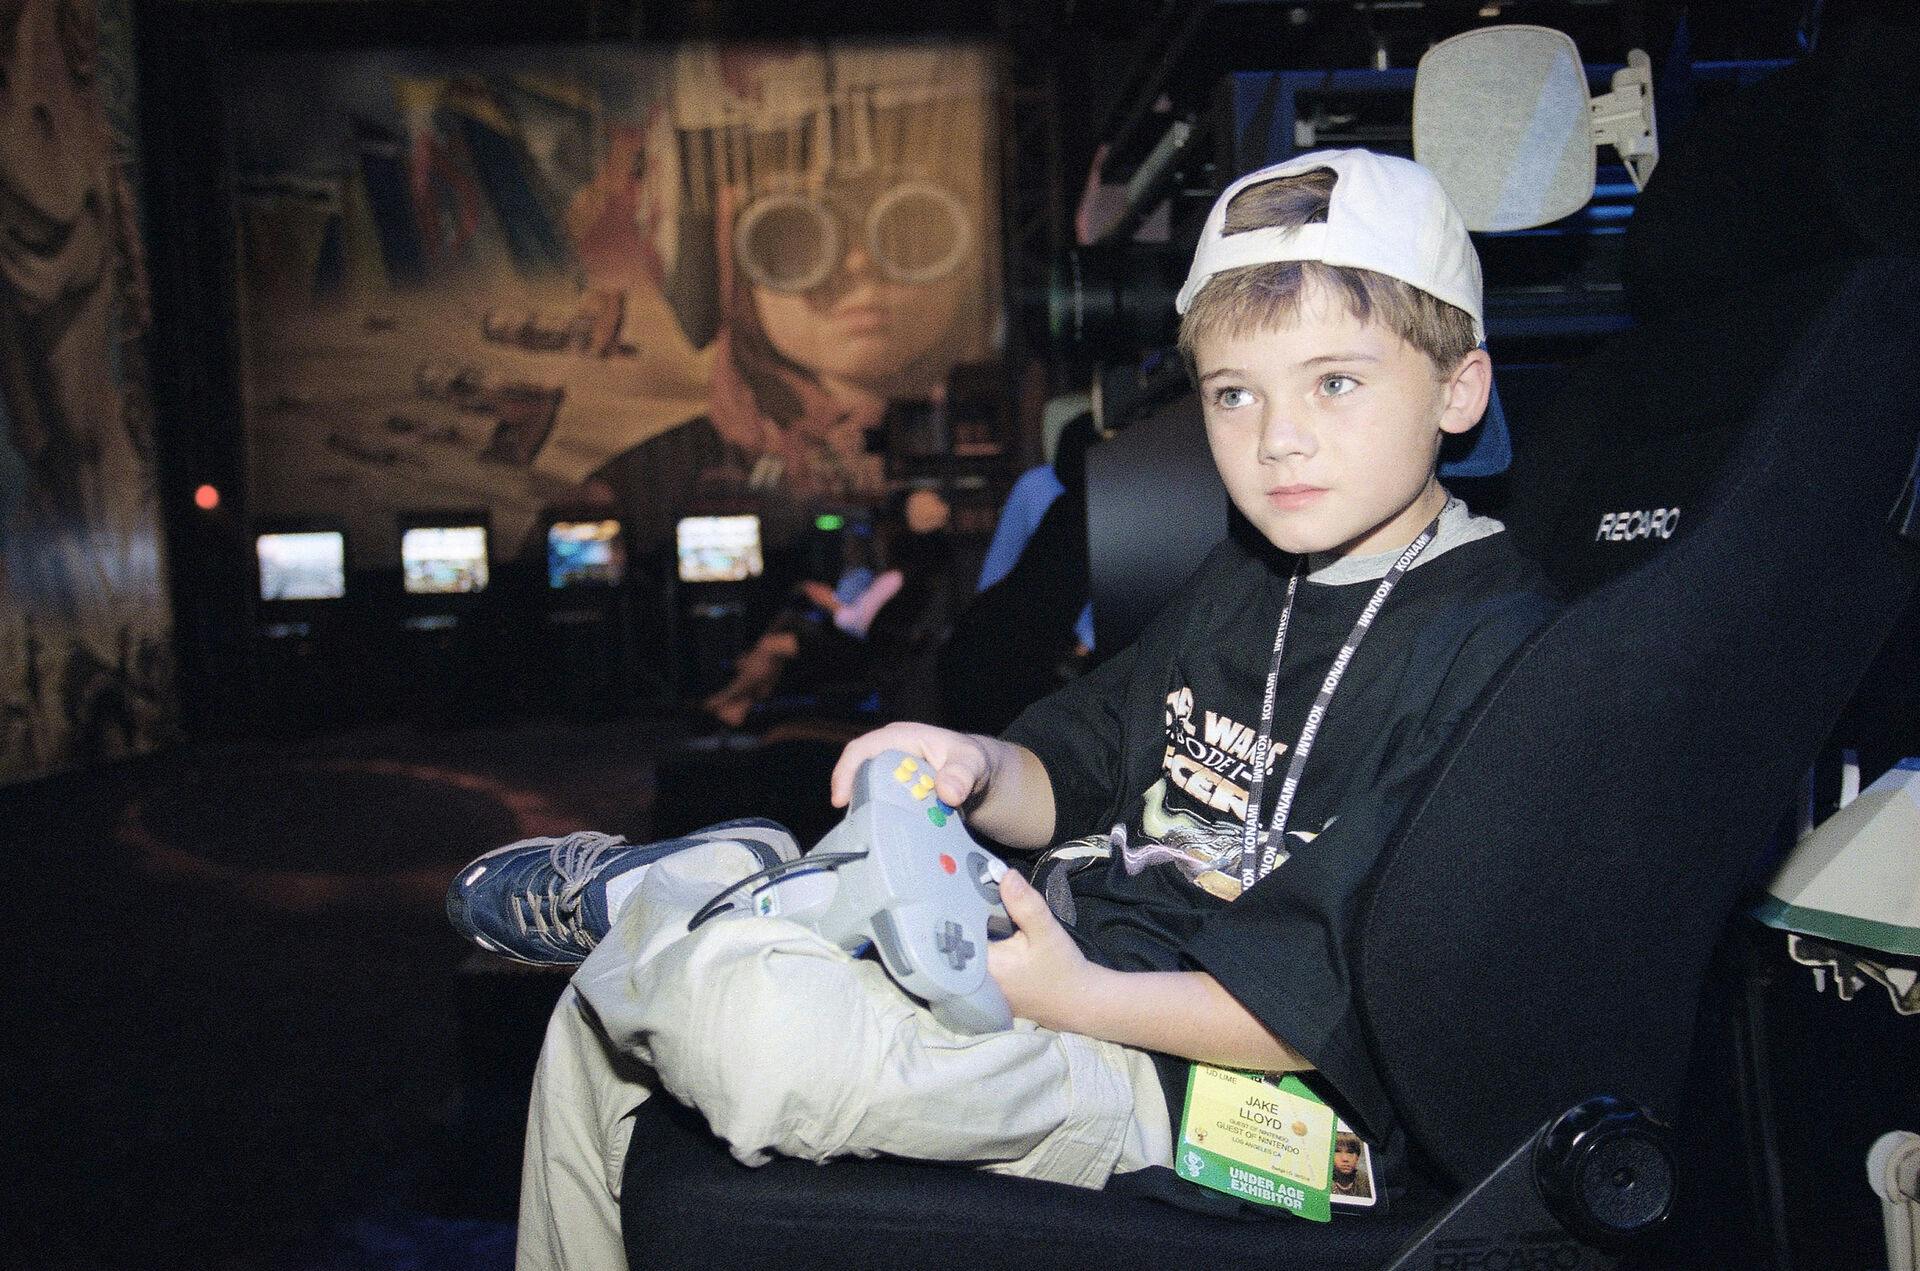 Actor Jake Lloyd; who portrays young Anakin Skywalker in the film Star Wars Episode I: The Phantom Menace; plays a new Nintendo game 'Star Wars Episode I Racer' at the Los Angeles Convention Center during the Electronic Entertainment Expo, Thursday, May 13, 1999, billed as the showcase for the global video and PC game industry. The E3 expo opened on Thursday. (AP Photo/Kevork Djansezian)